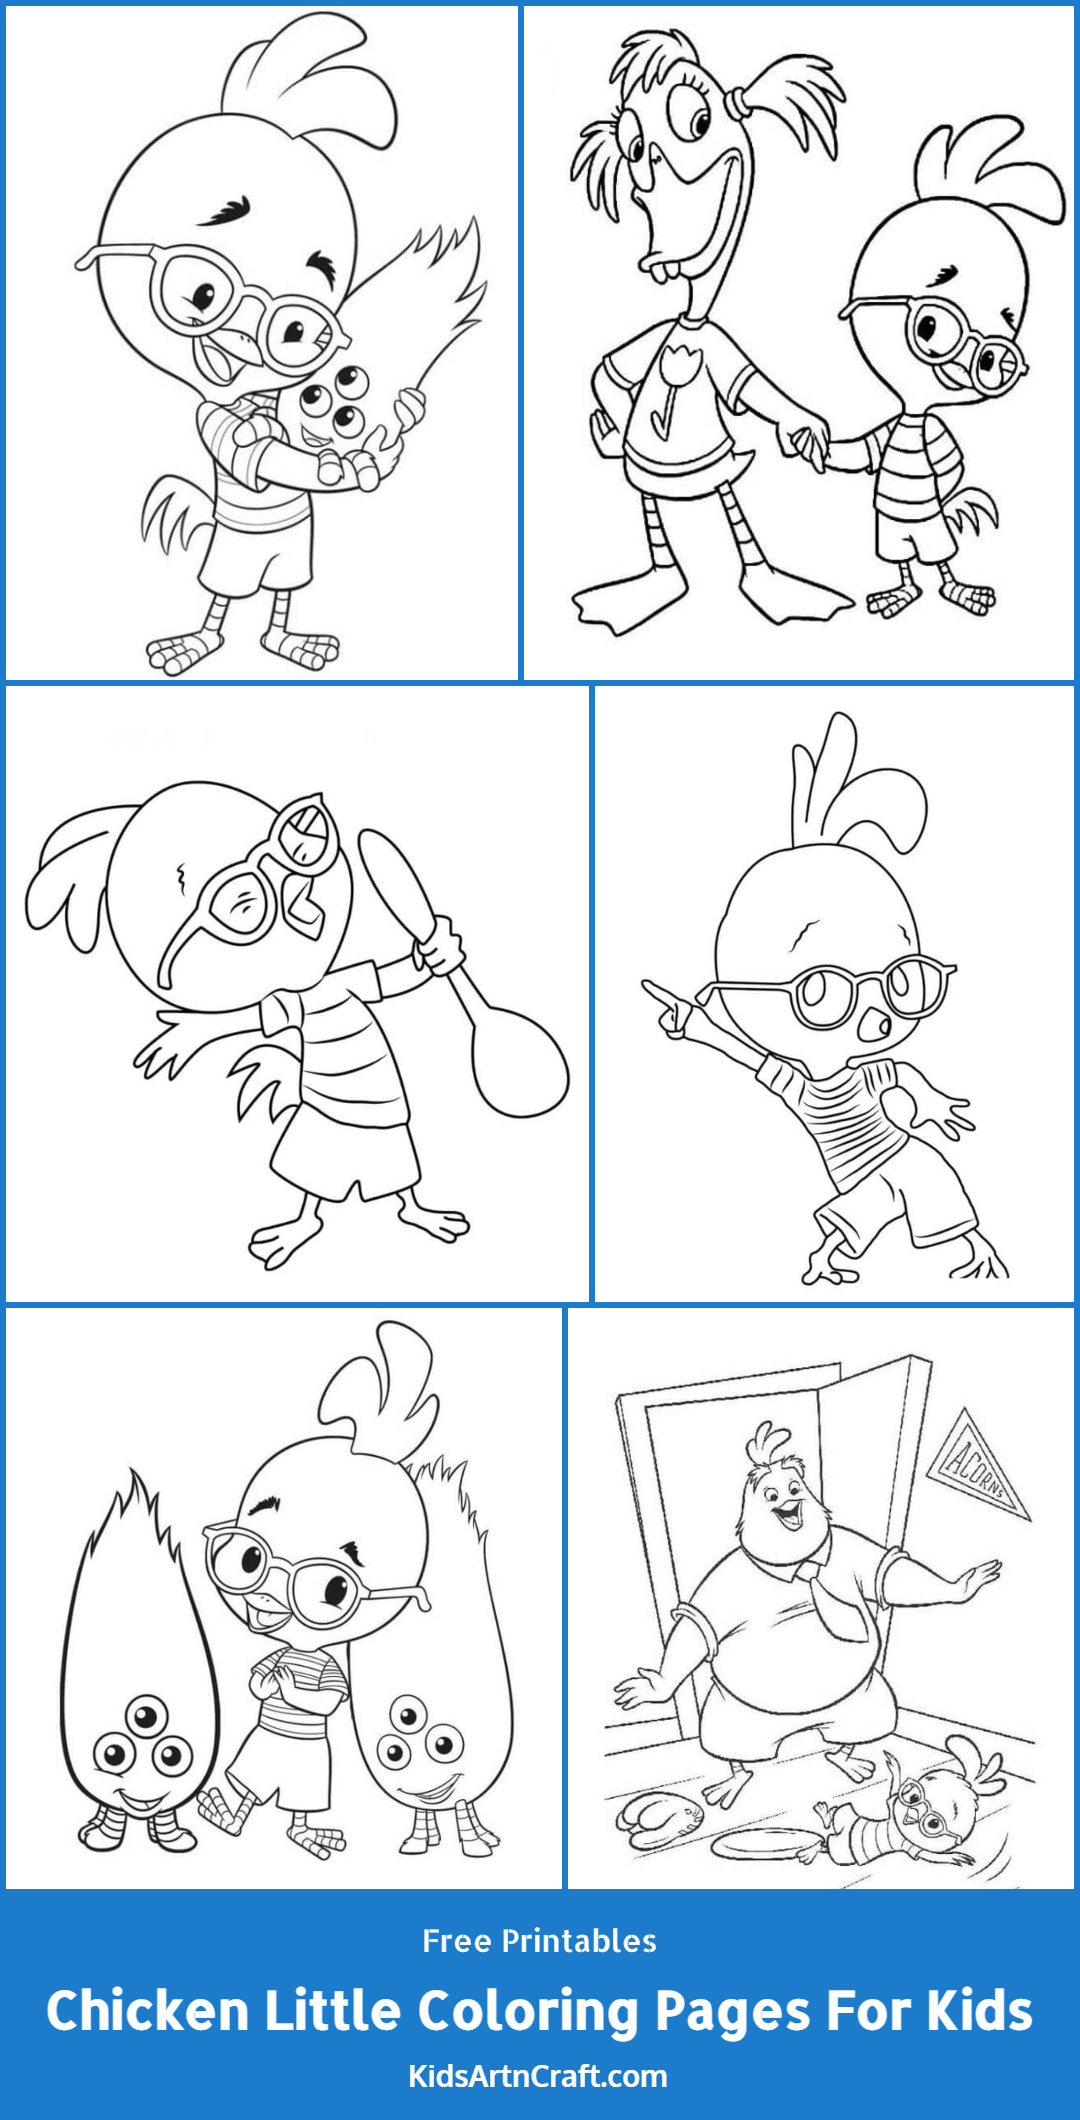 Chicken Little Coloring Pages For Kids – Free Printables